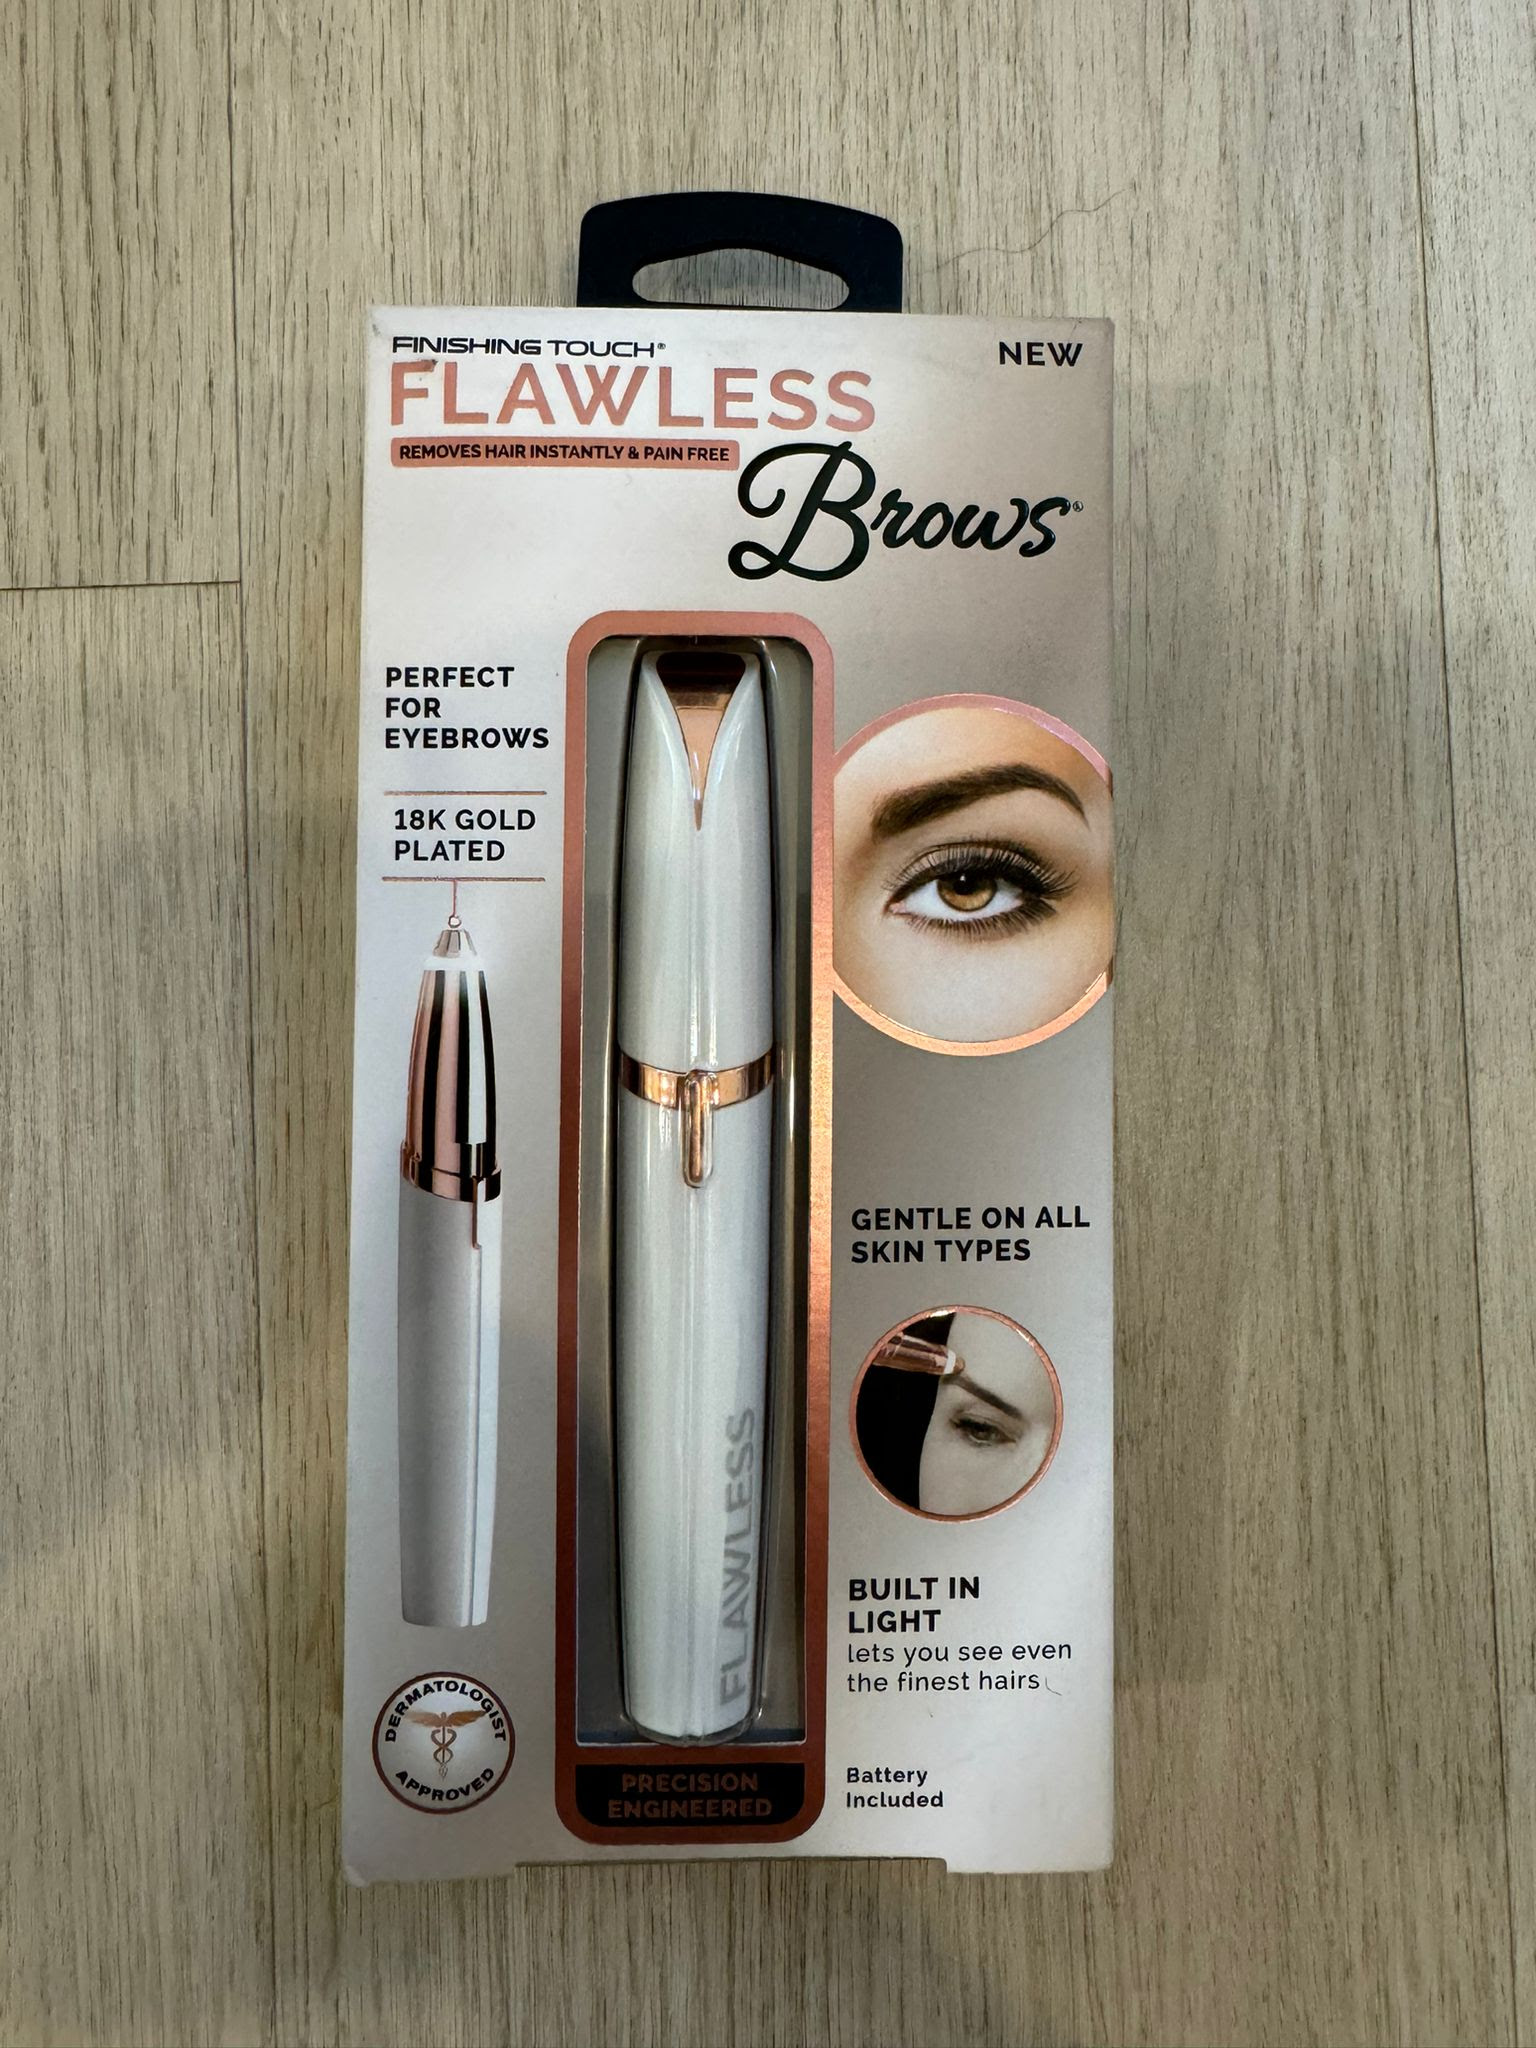 Flawless Eyebrow Hair Remover. 5000units. EXW Los Angeles $5.50unit.